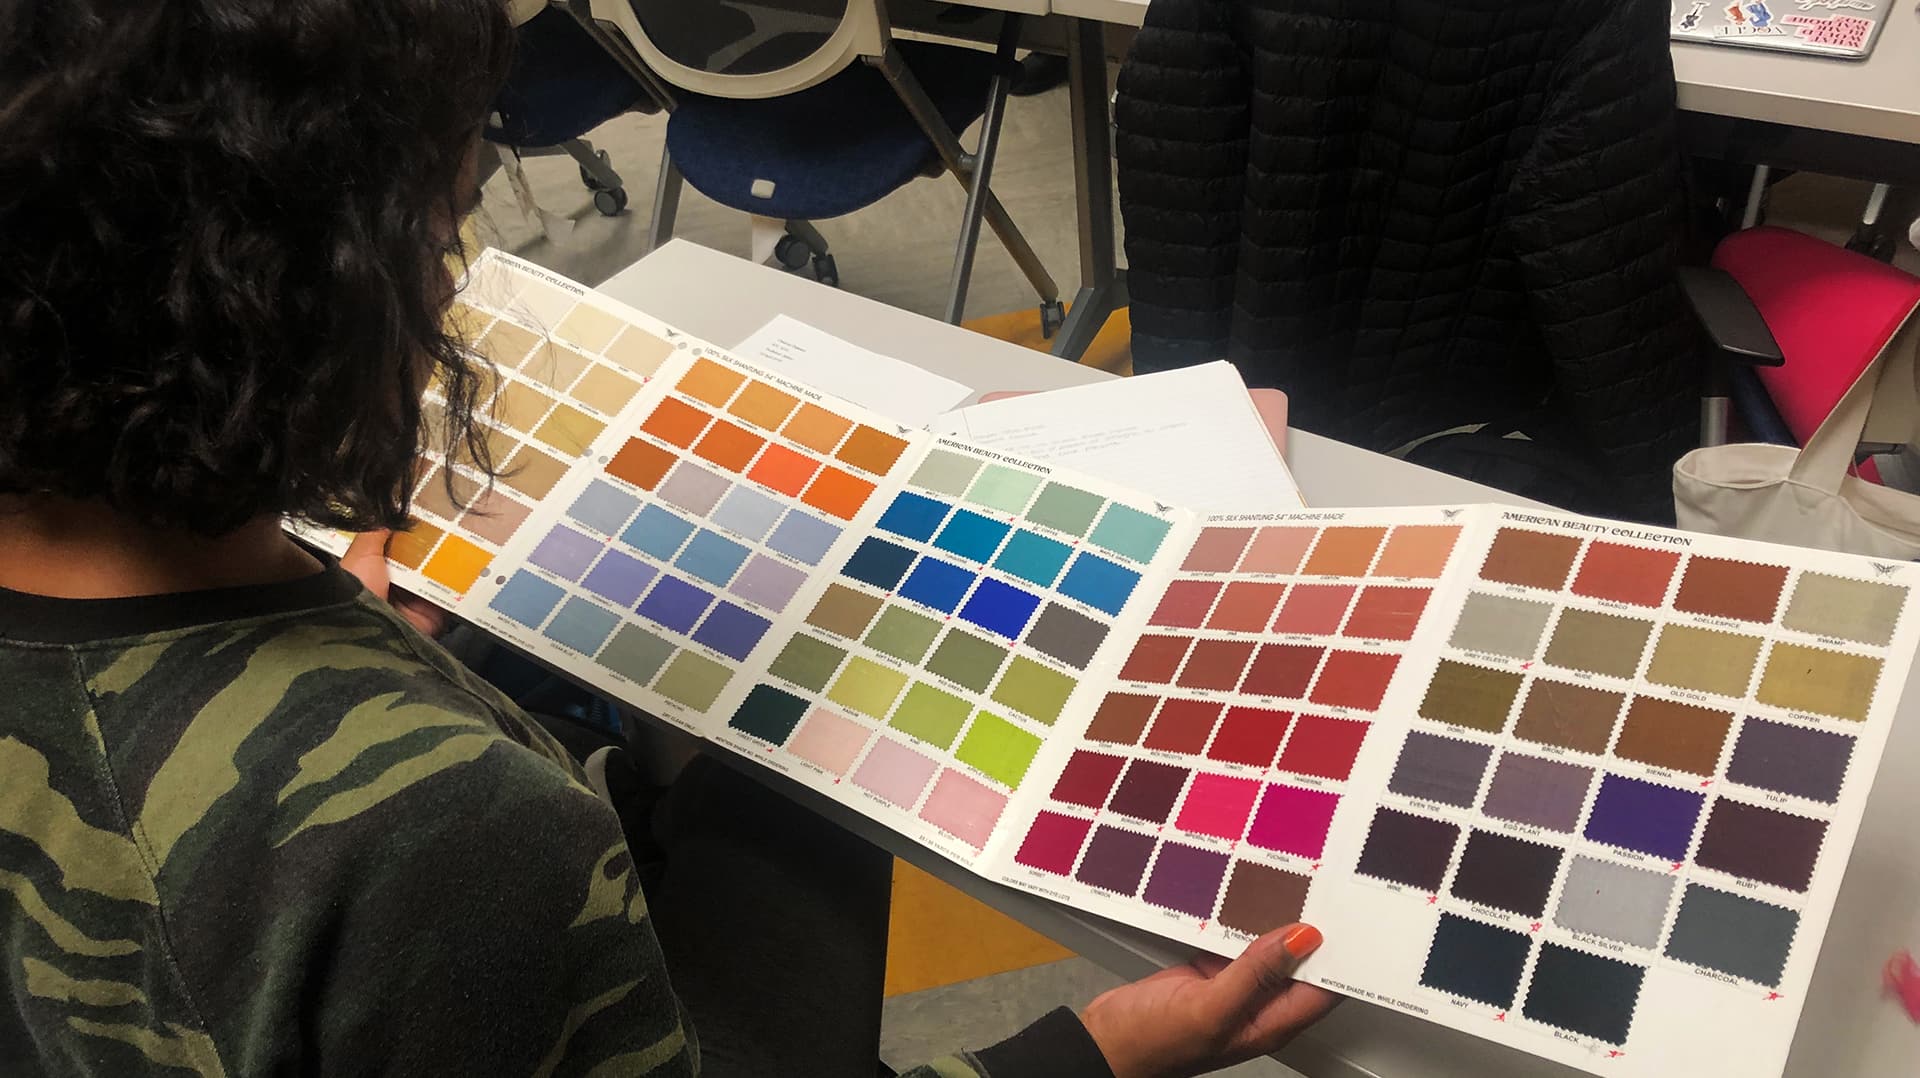 Students looking at color swatches.